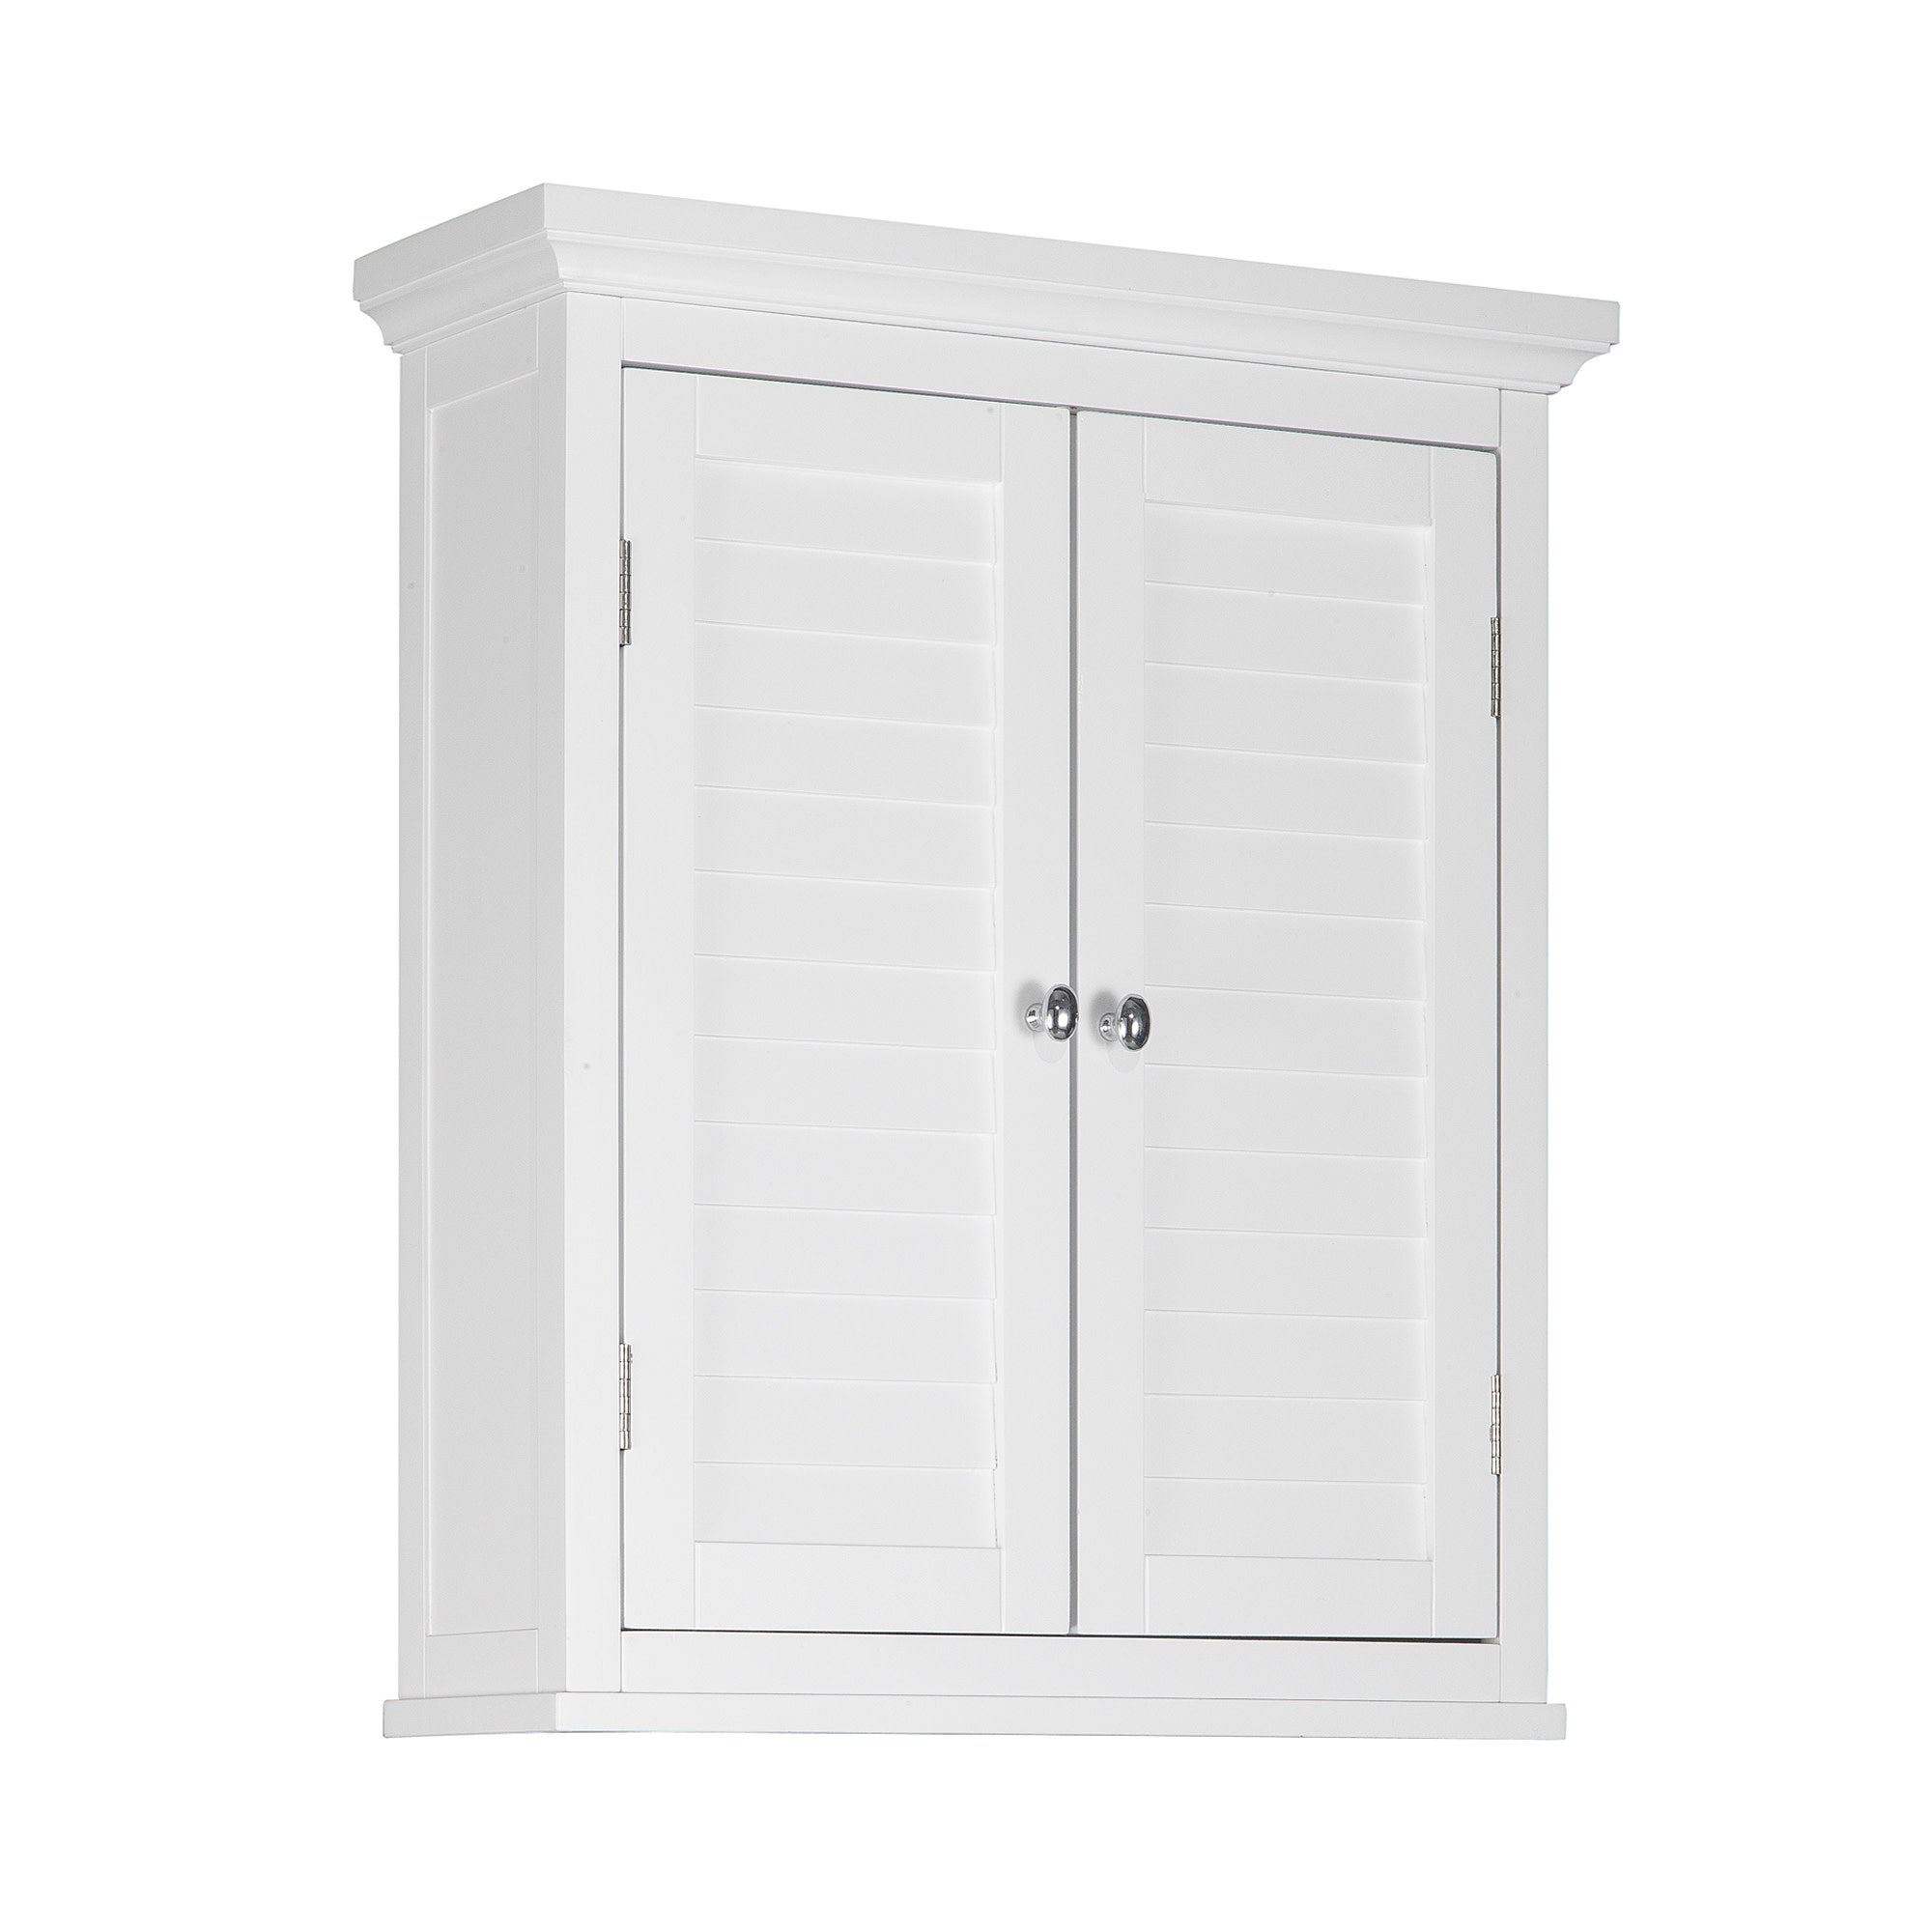 Teamson Home Glancy Wooden Wall Cabinet with Shutter Doors, White